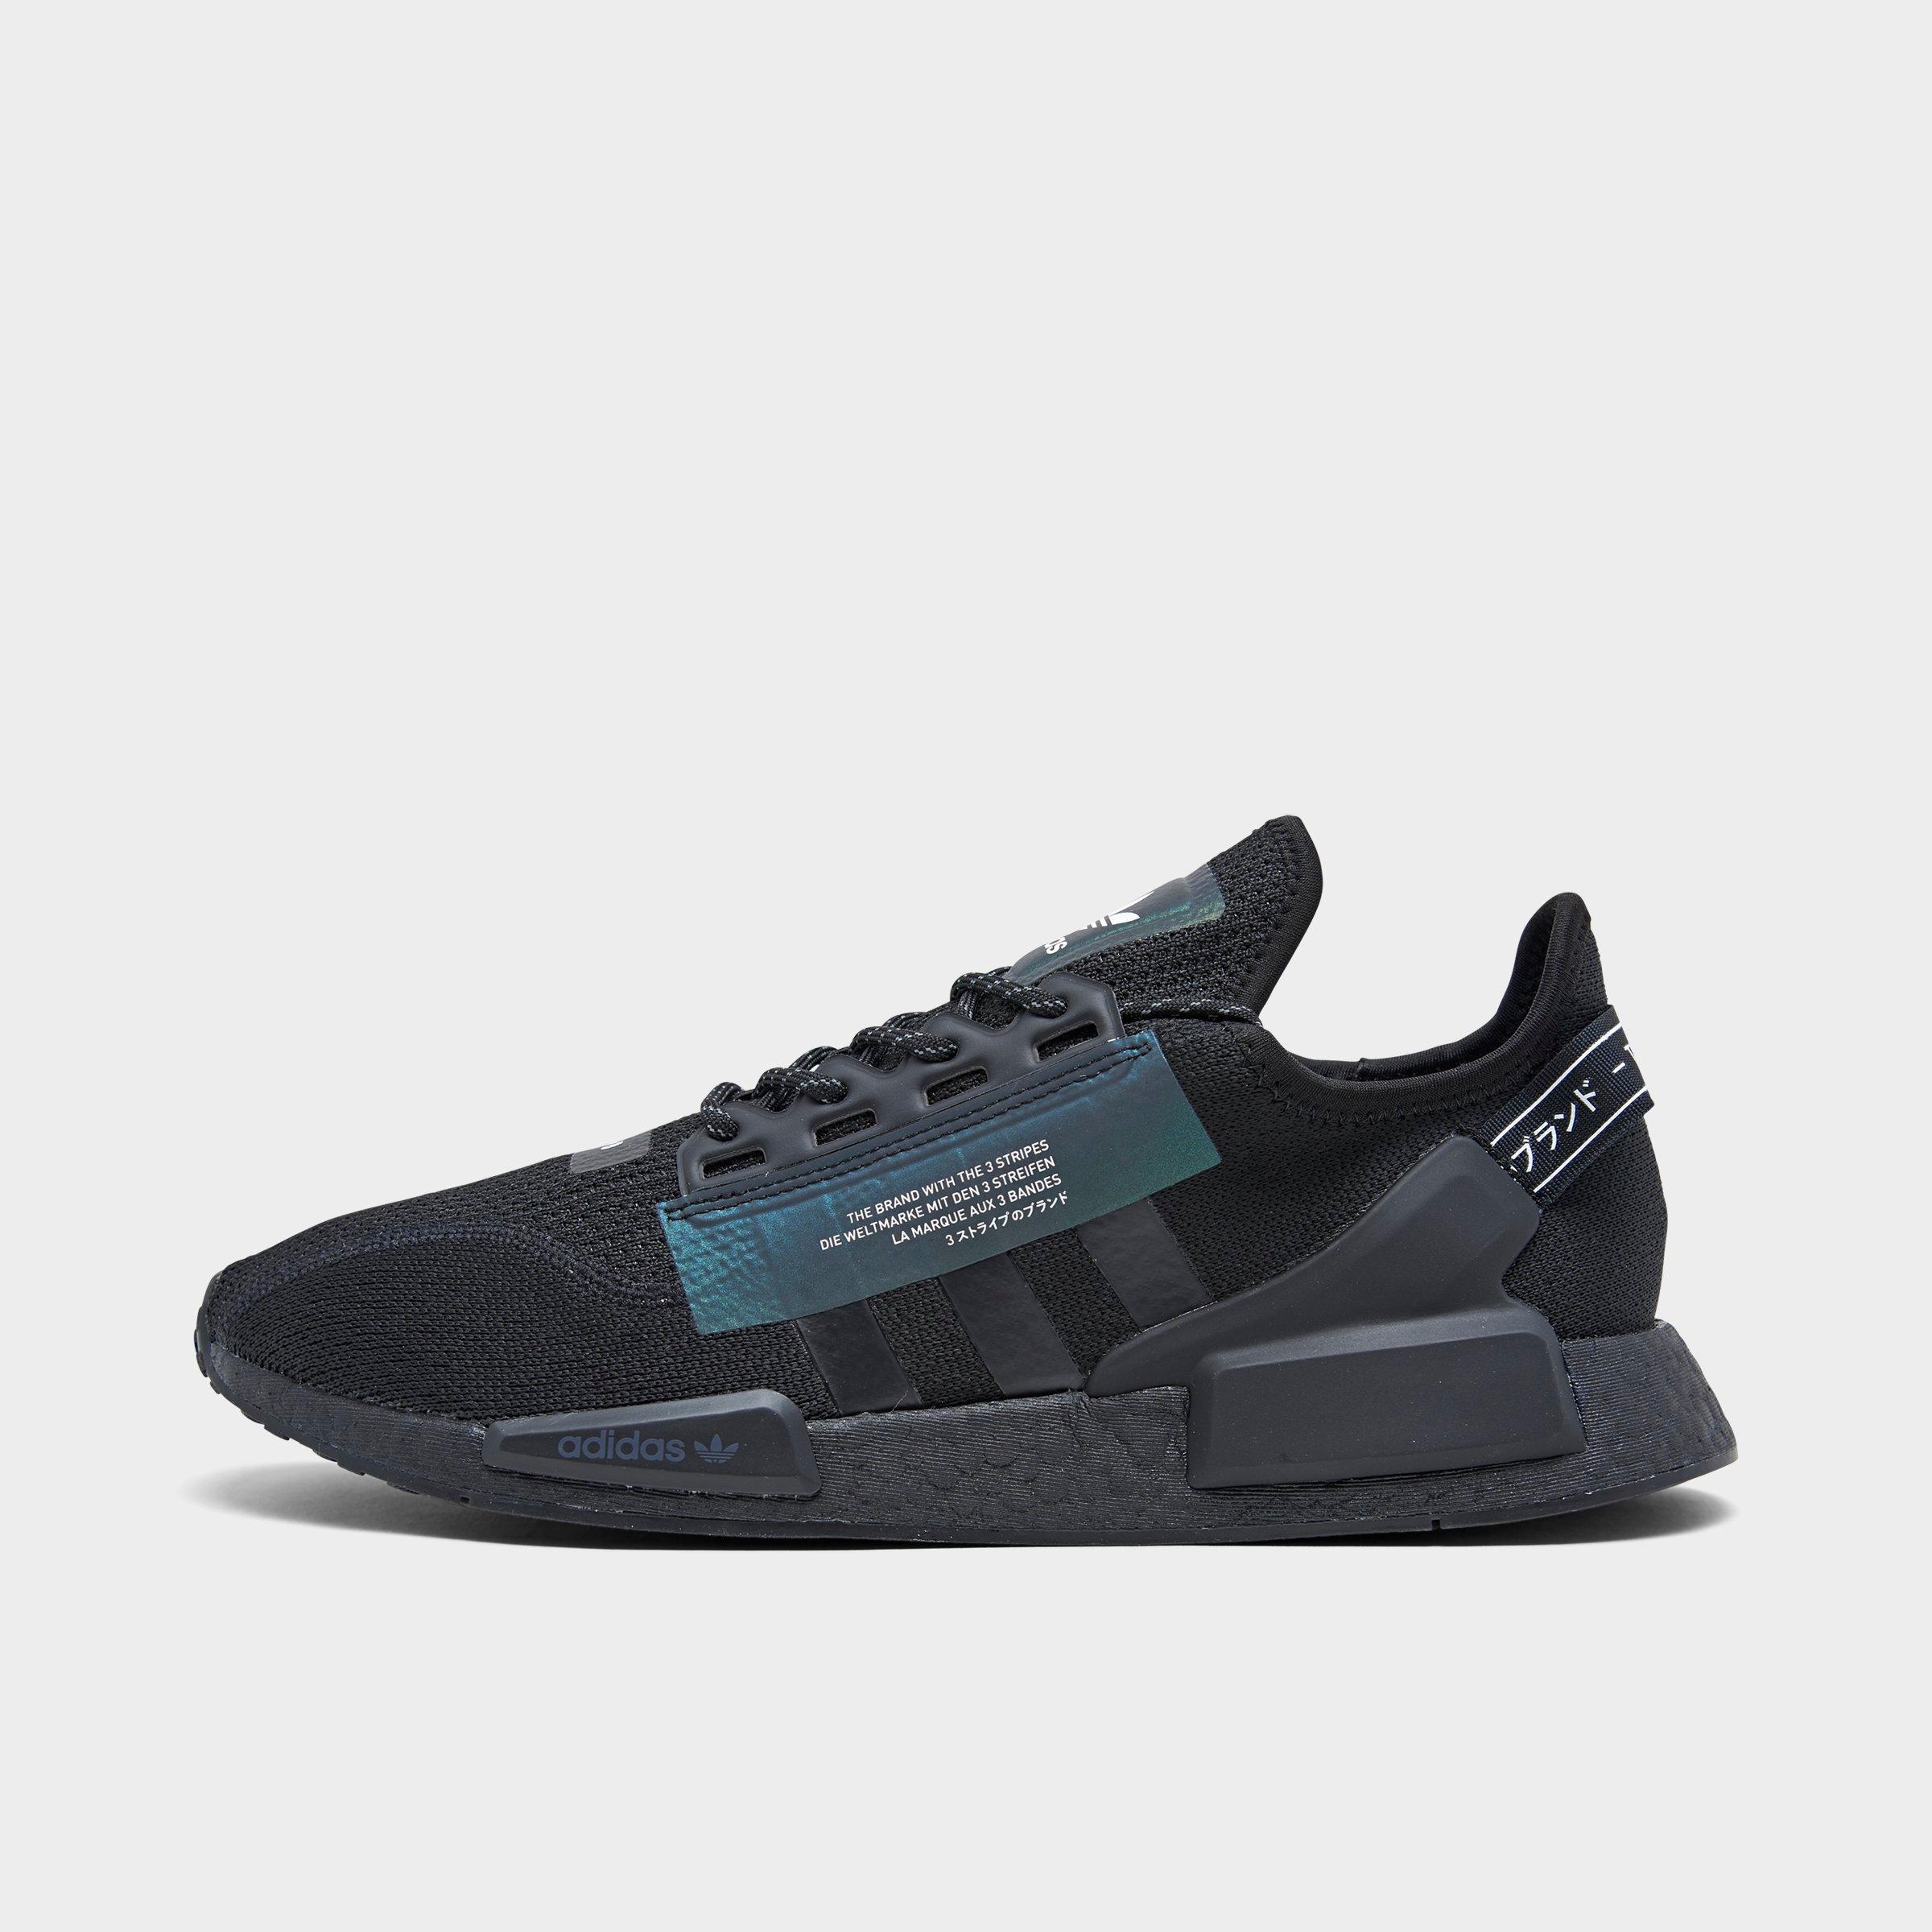 Buy Adidas NMD R1 Black Gray JD Exclusive Shoes Clearance